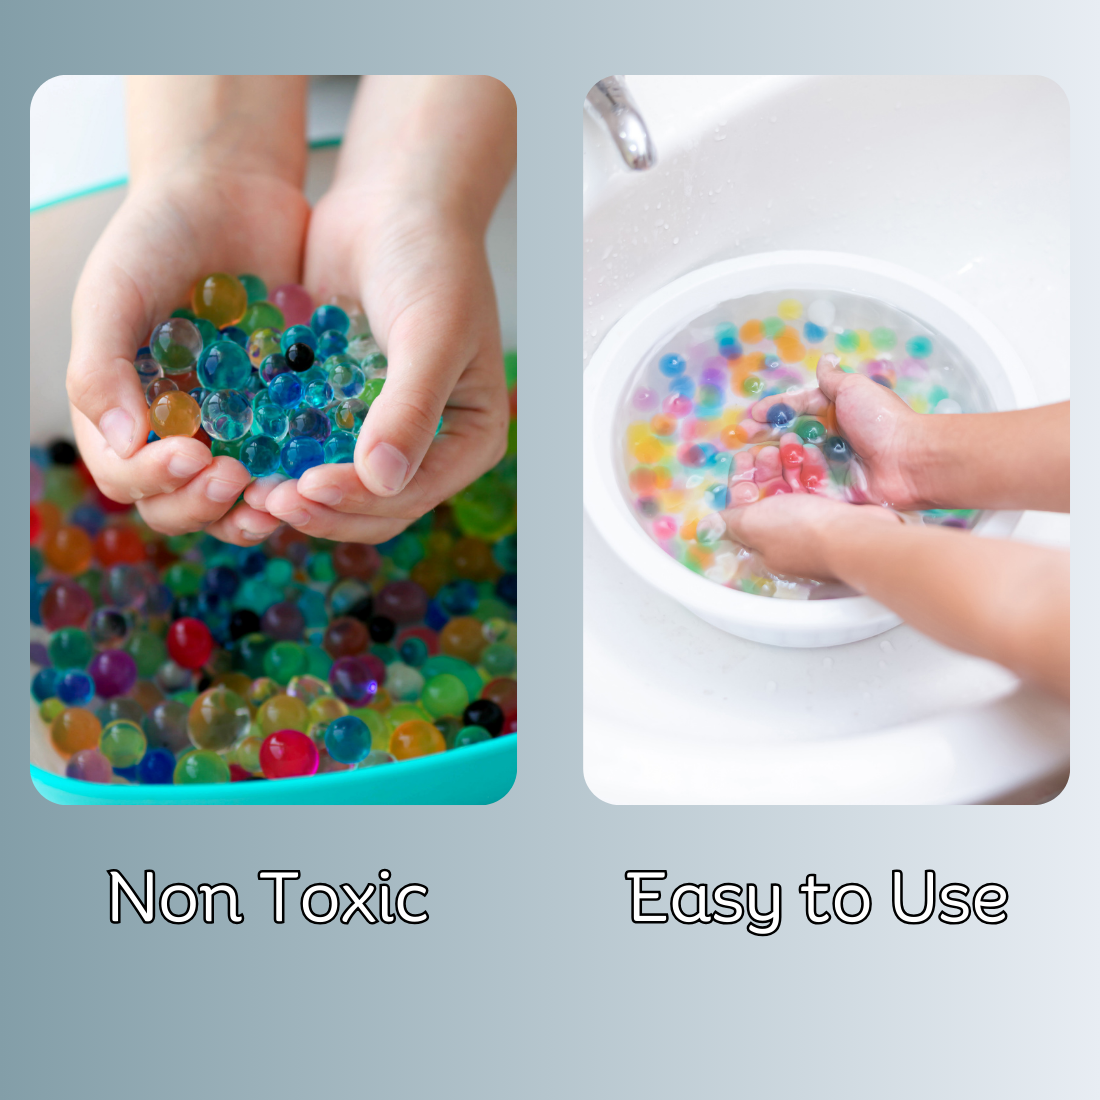 Magic Crystal Water Jelly Orbeez Balls: Water Bead Plant Soil